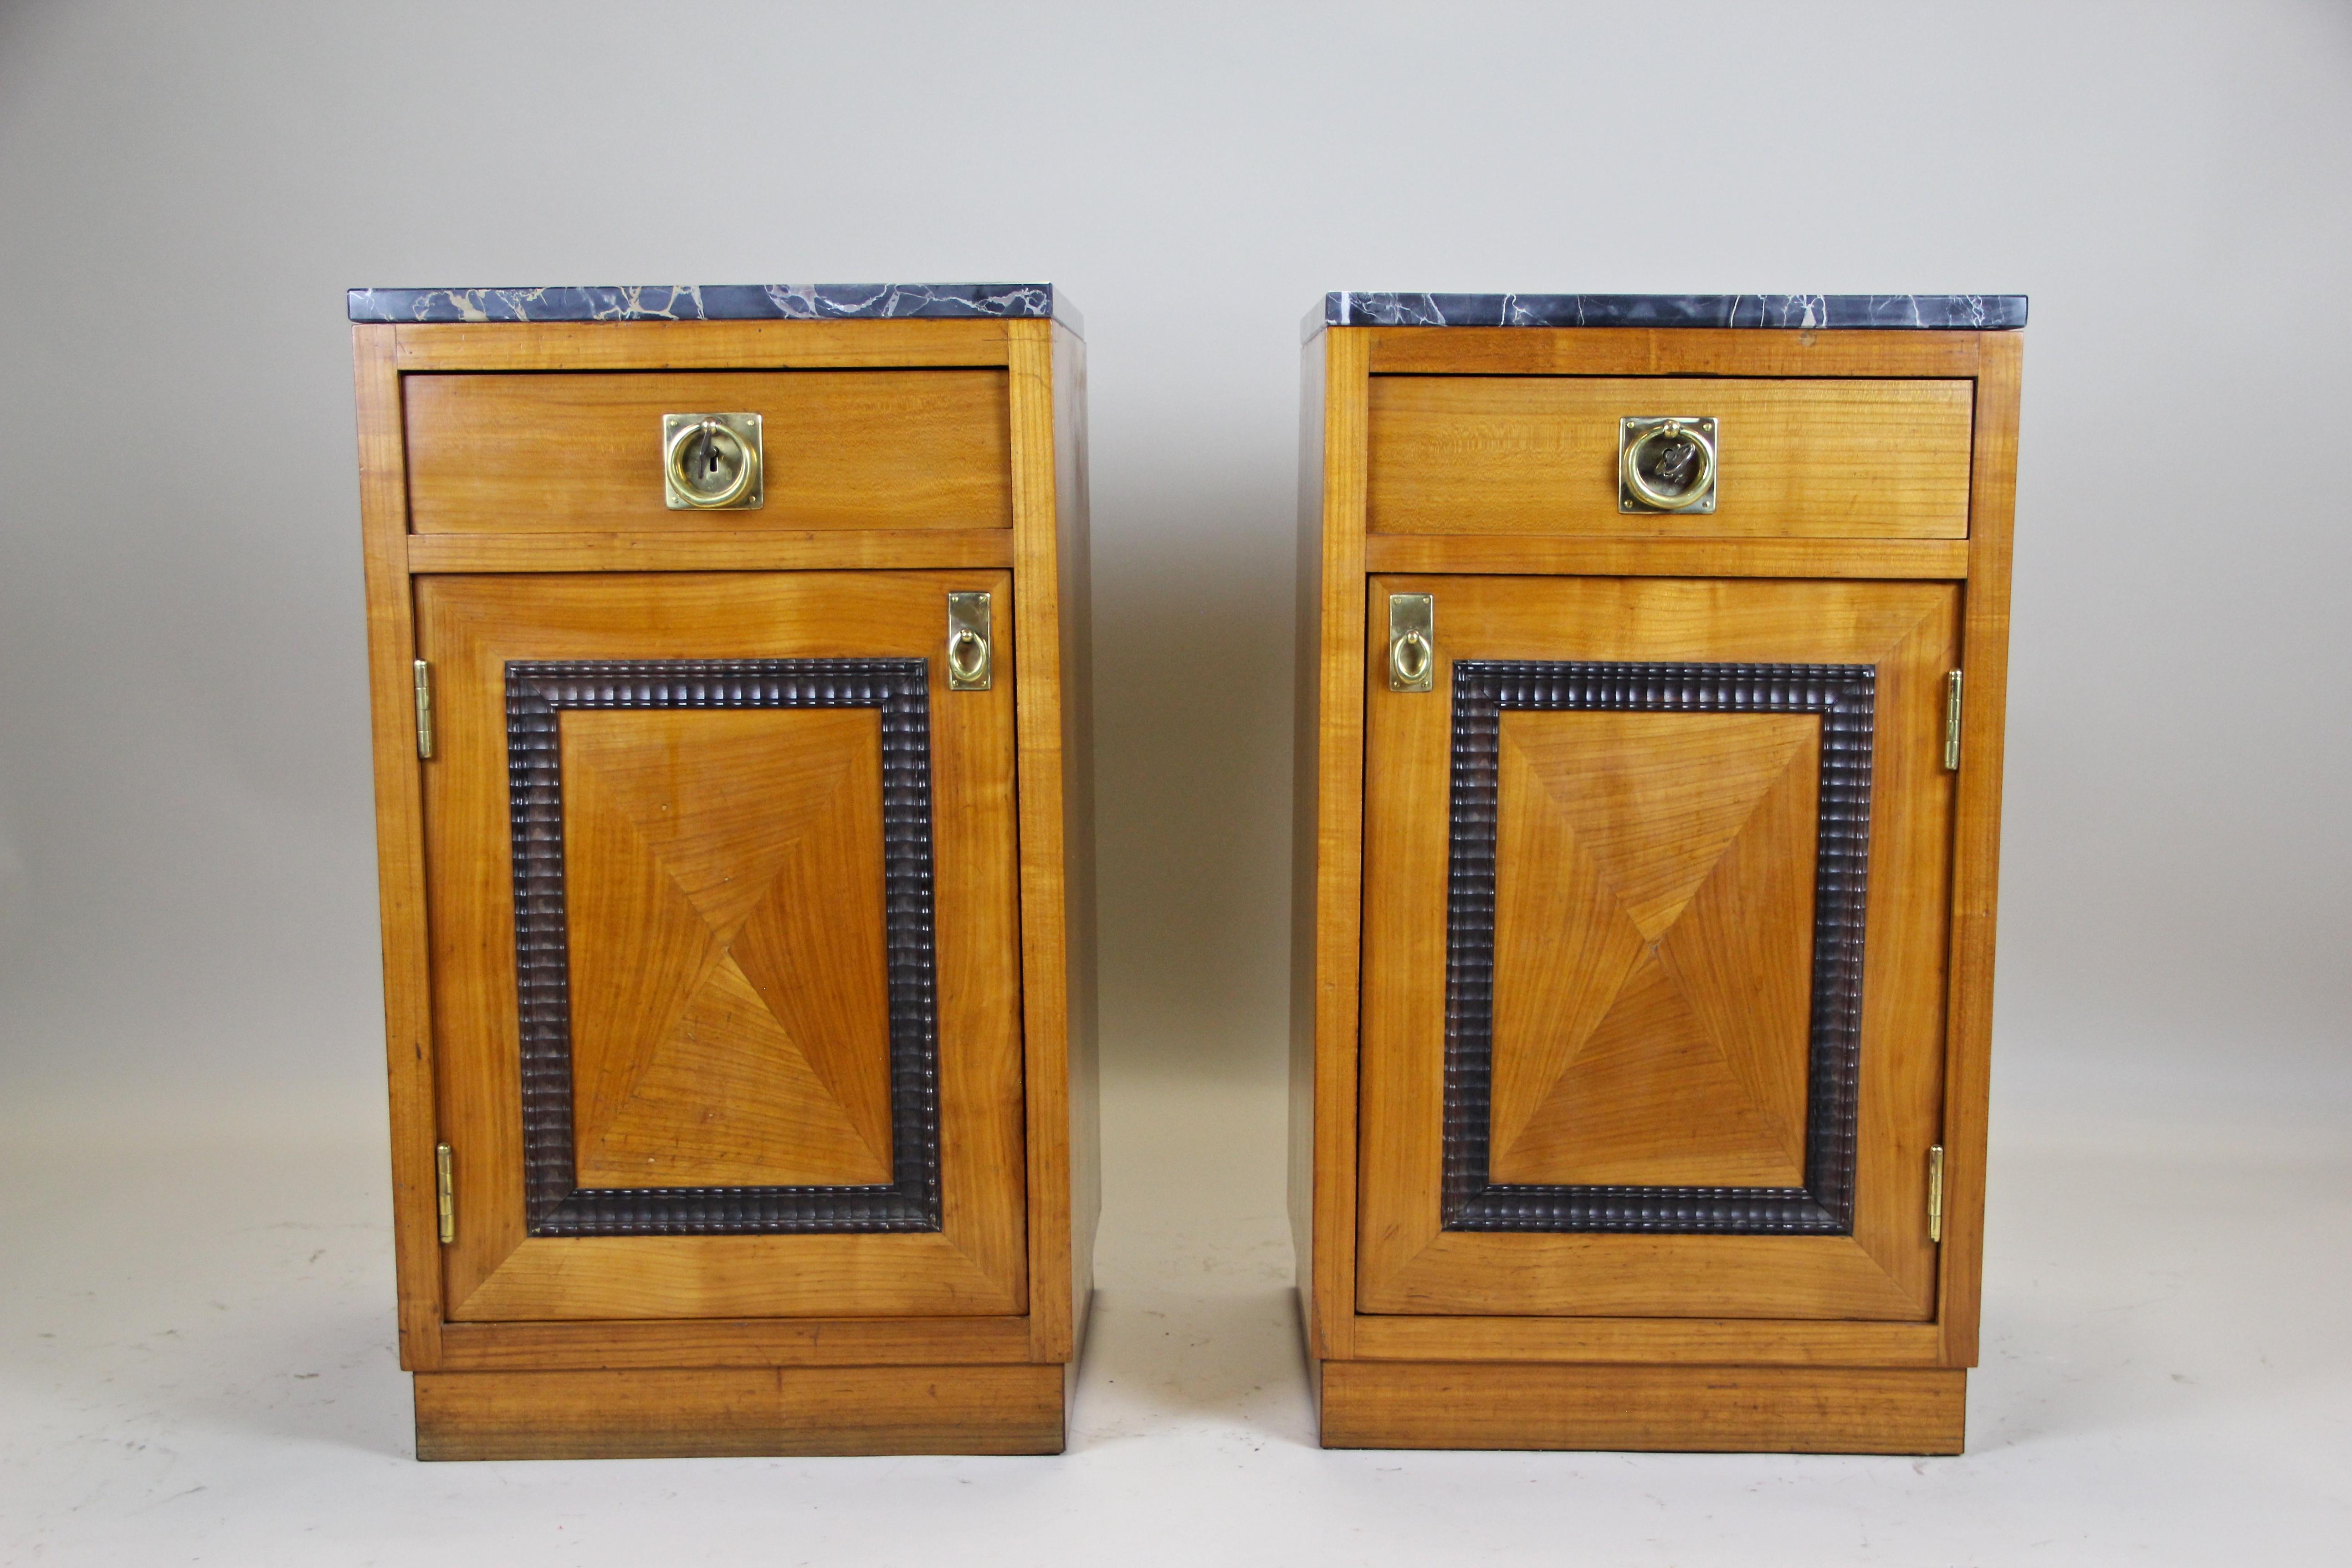 Lovely pair of Art Deco nightstands from circa 1920 out of Austria. The straight shaped matching nightstands impress with beautiful set cherrywood veneer. The doors show a great design with inserted ebonized waved bars and can be easily